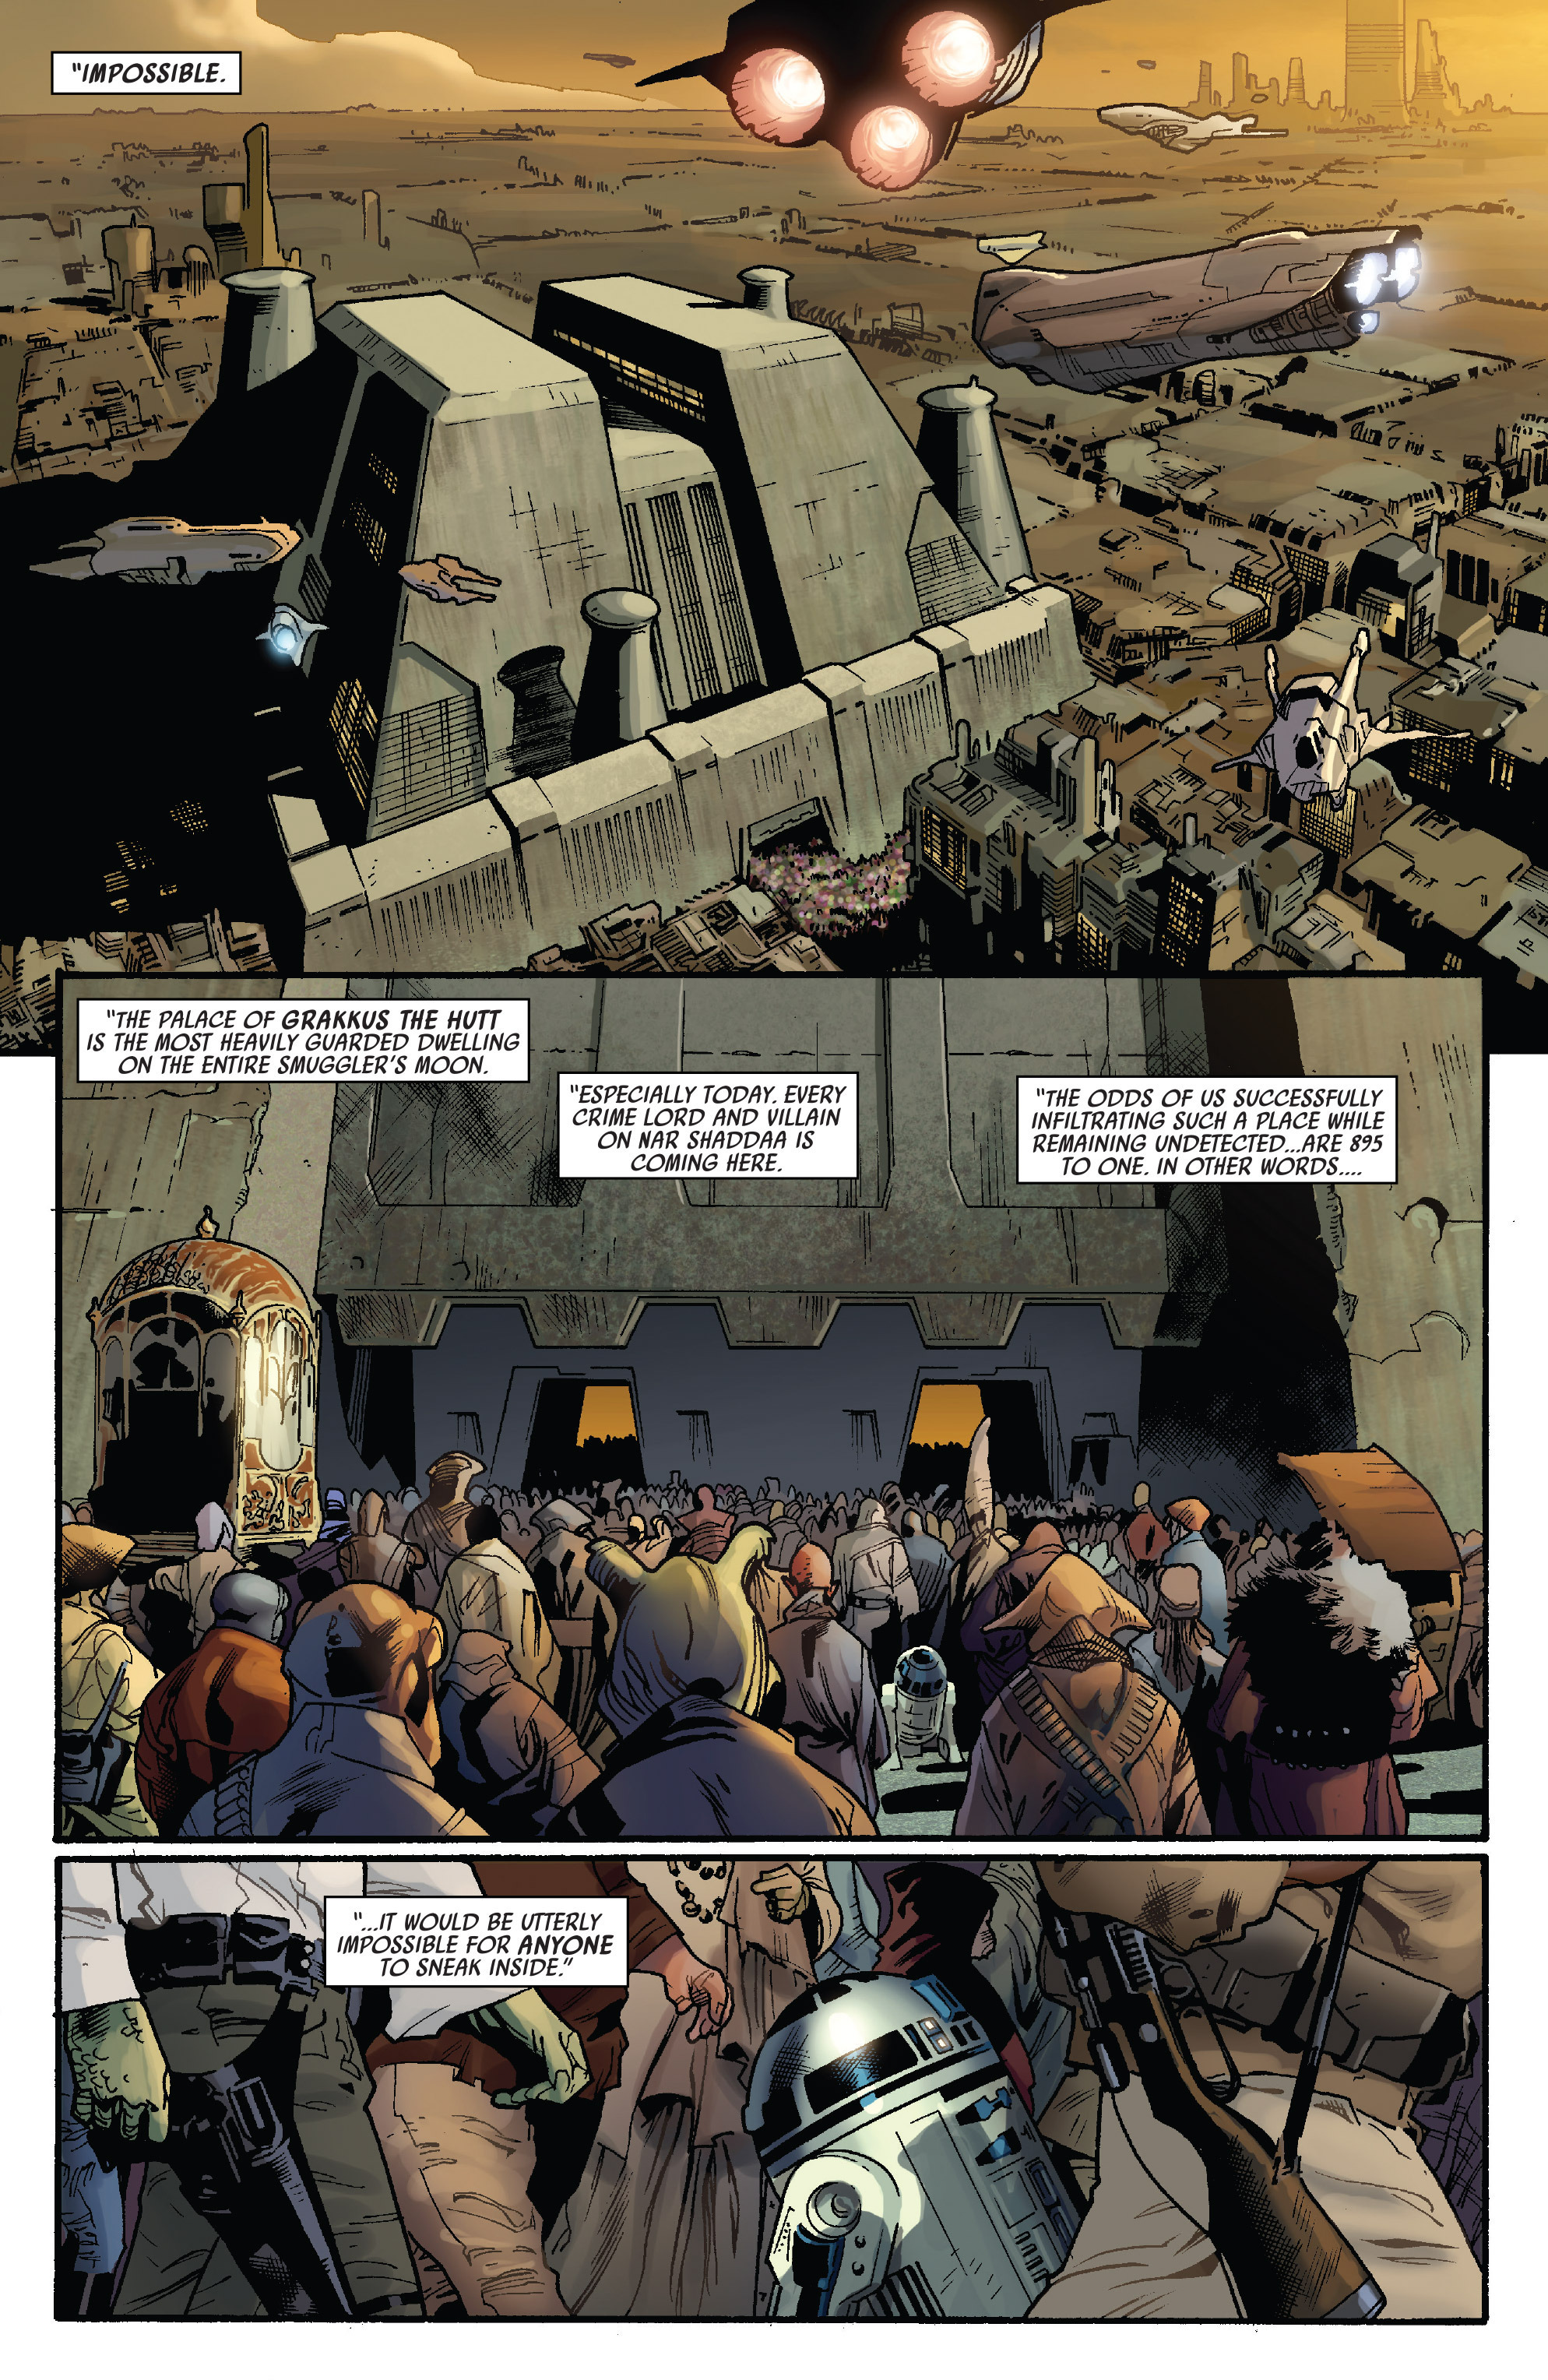 Star Wars (2015-): Chapter 11 - Page 3